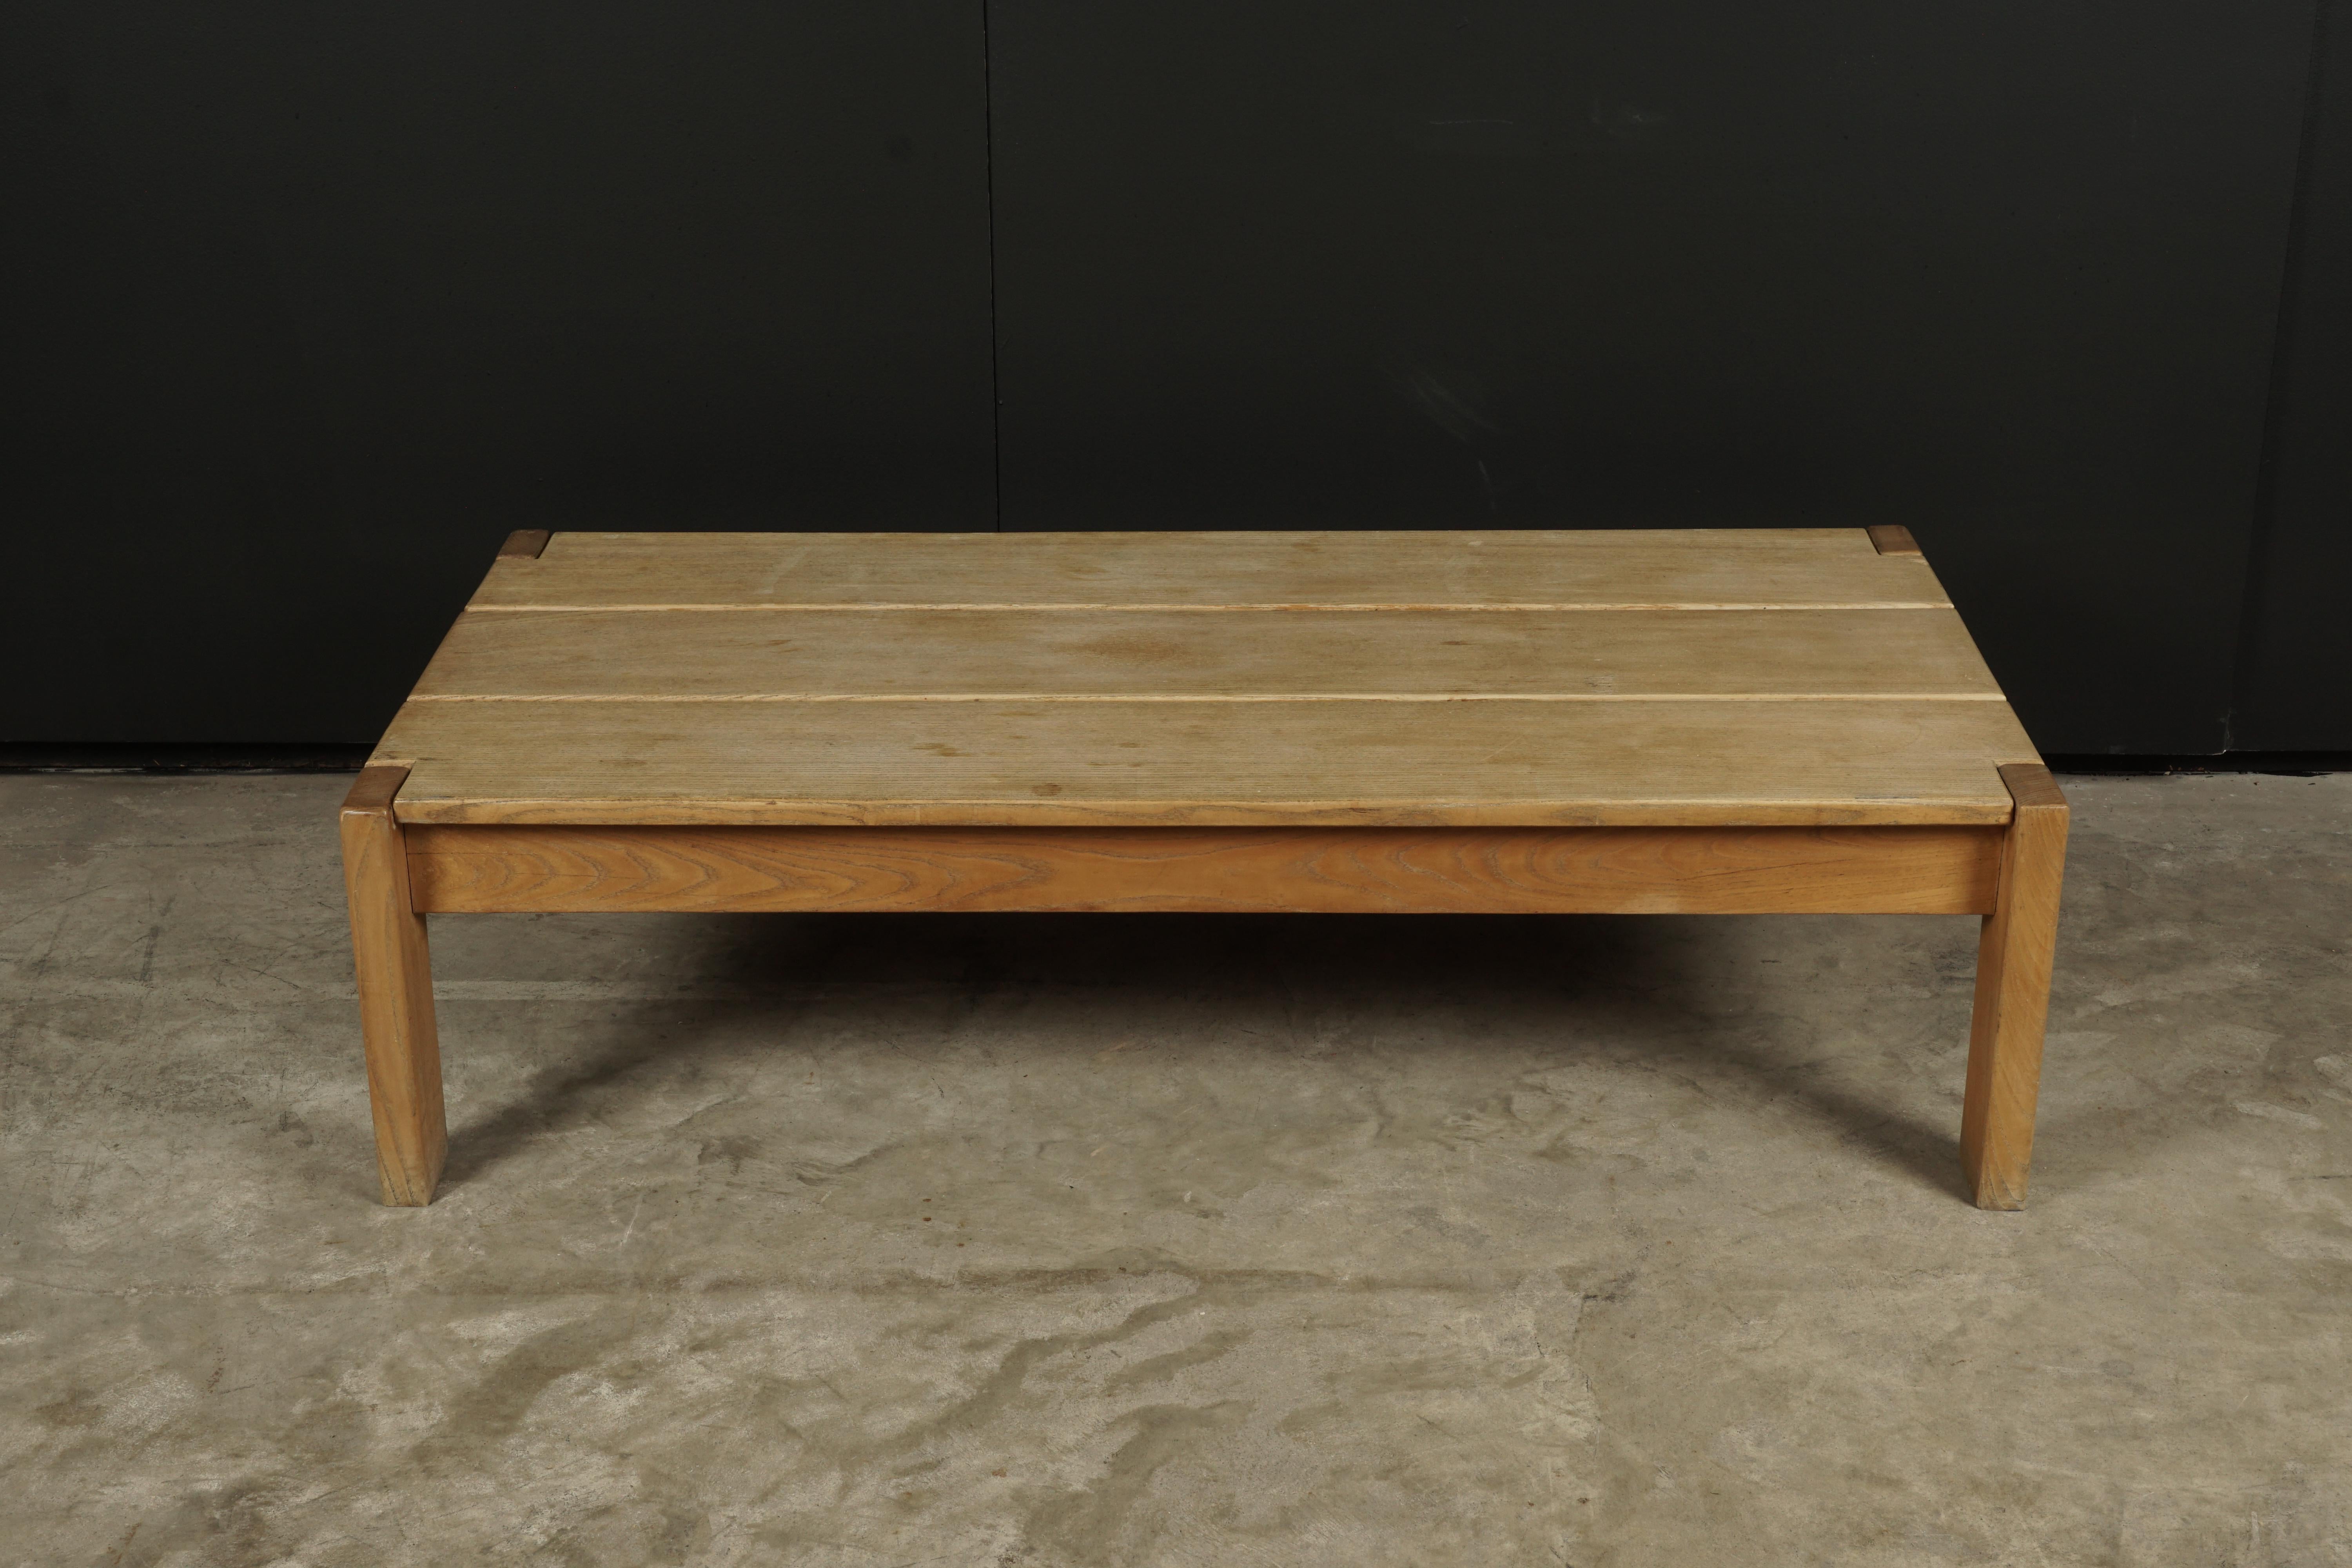 Vintage midcentury coffee table from France, circa 1960. Solid oak construction with light patina and wear.